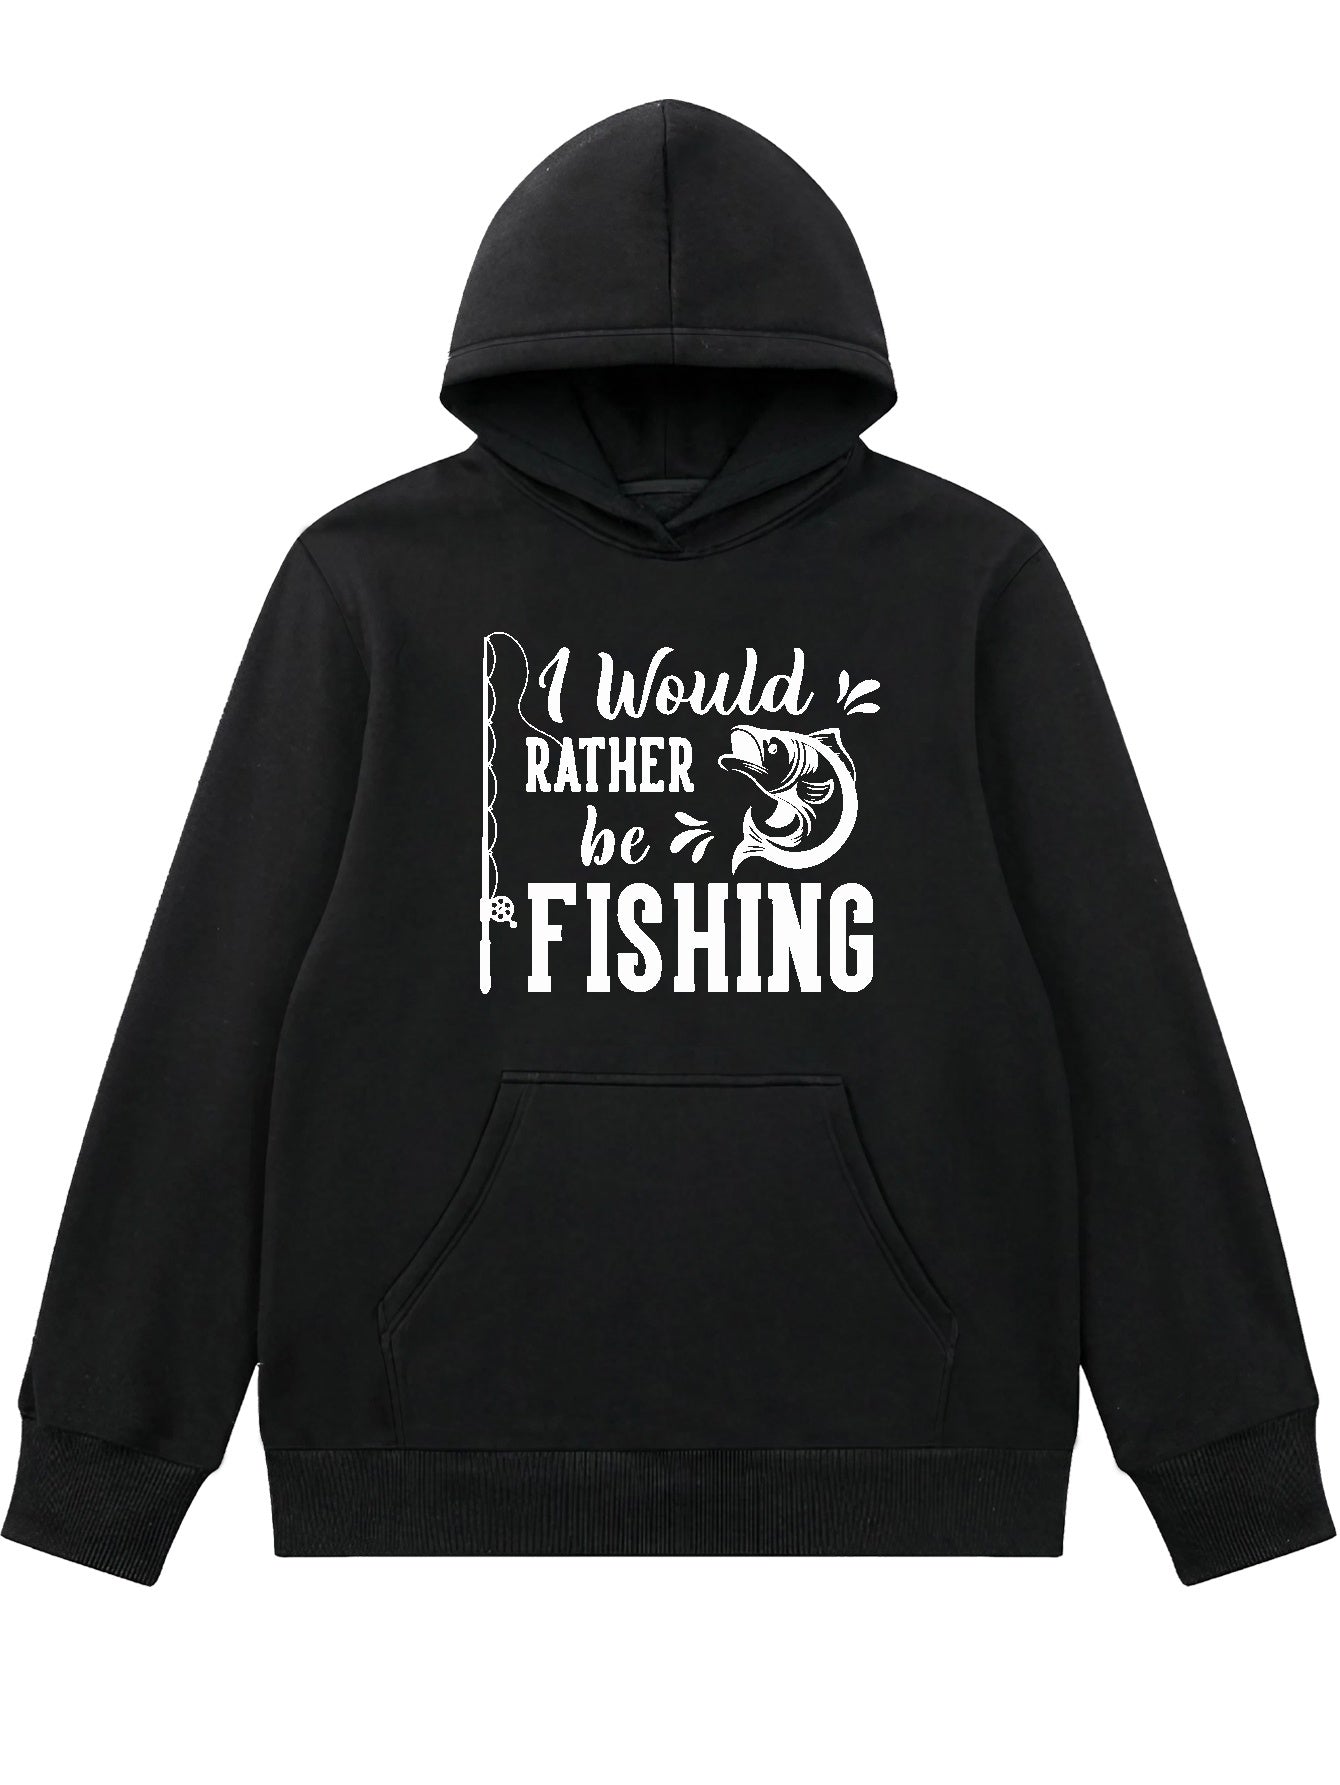 Fish Pattern And Letter Print Hoodie, Cool Hoodies For Men, Men's Casual Graphic Design Pullover Hooded Sweatshirt With Kangaroo Pocket Streetwear For Winter Fall, As Gifts